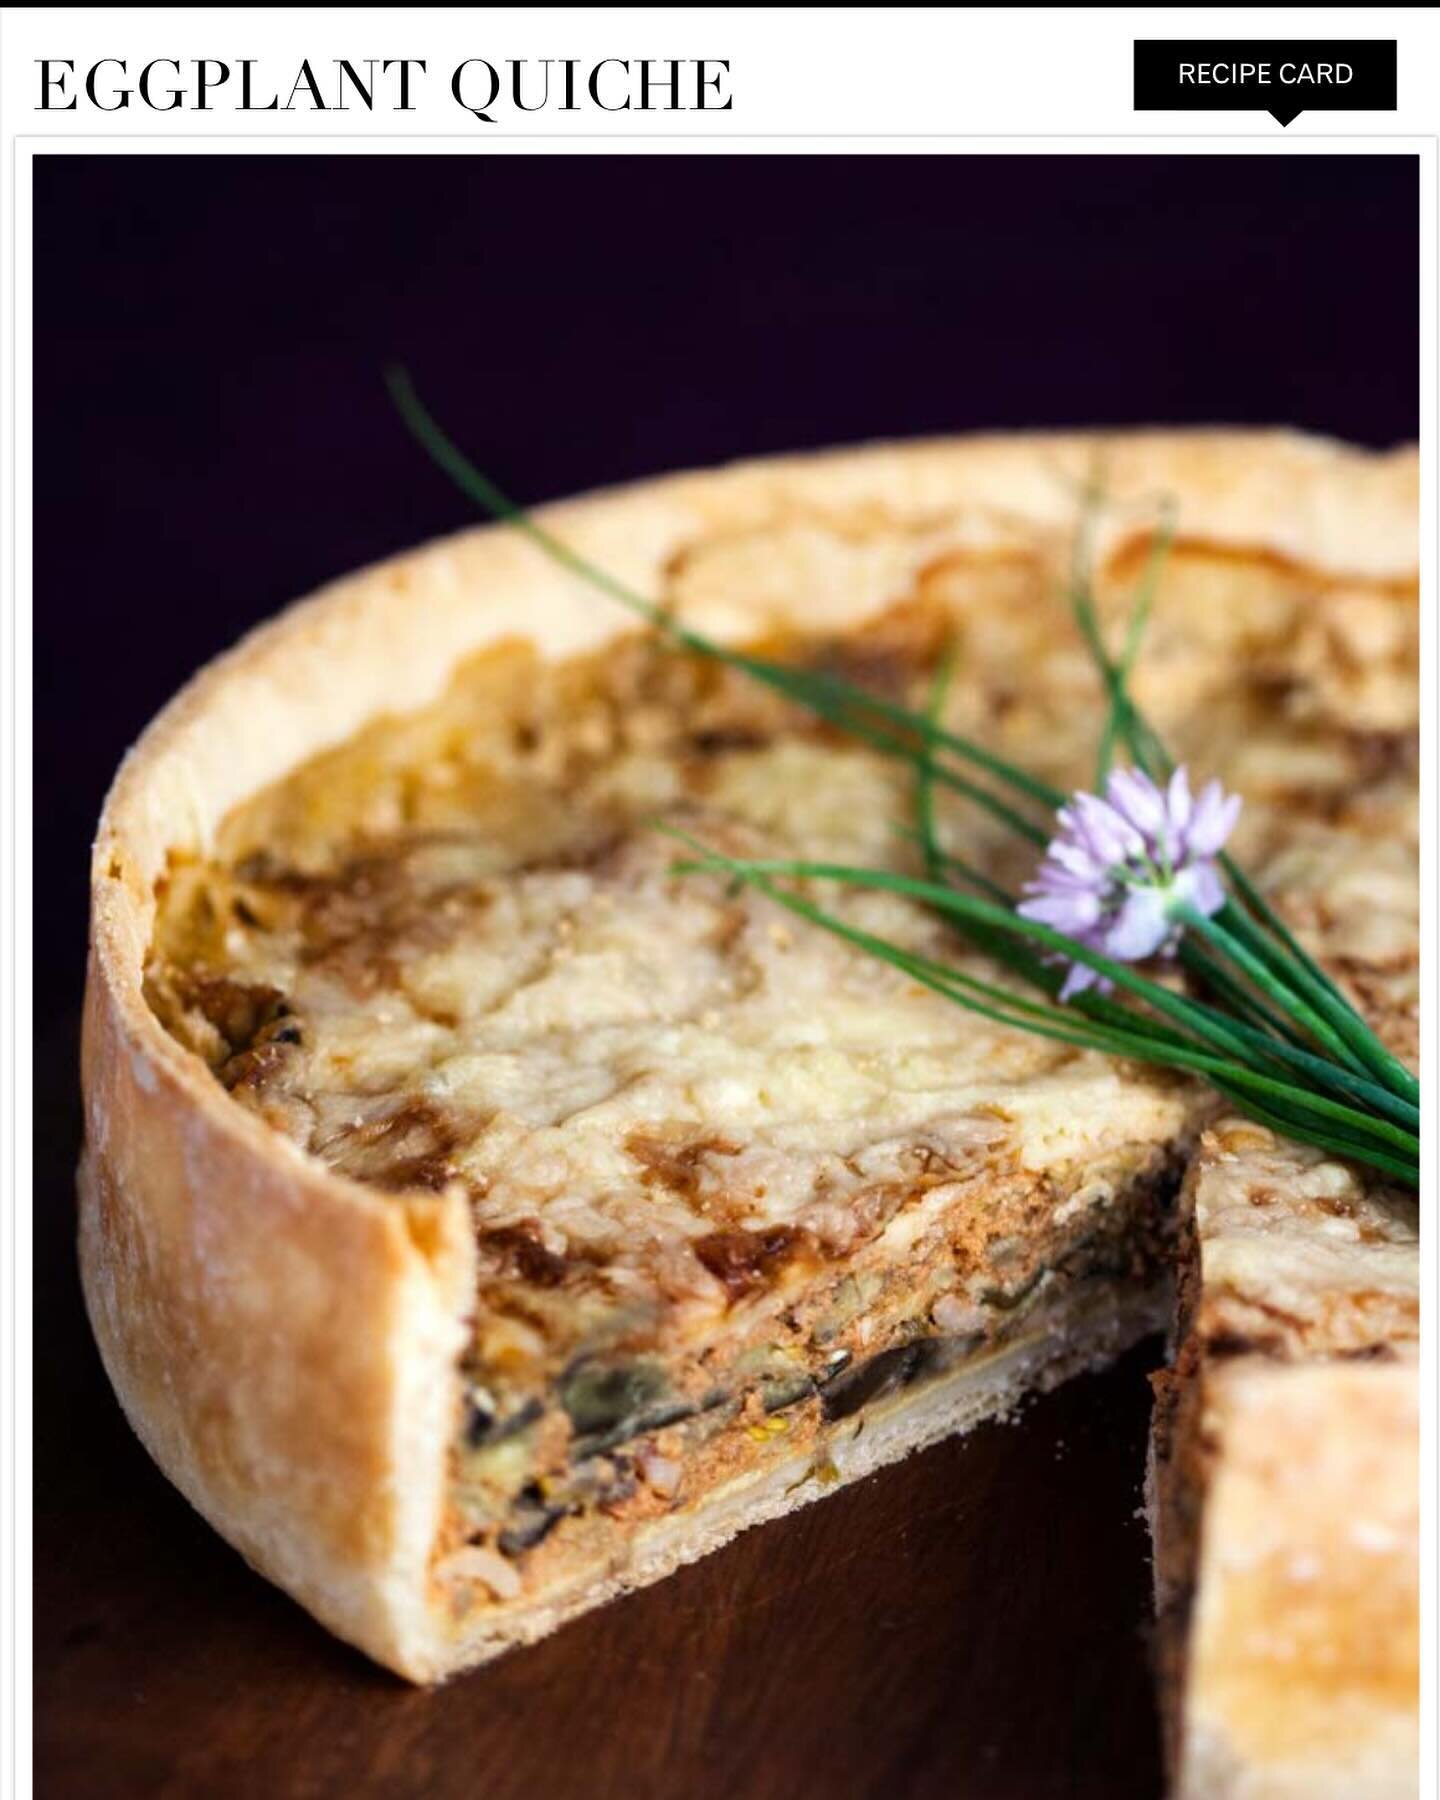 BEAUTIFUL FOOD BY DESIGN | Eggplant Quiche via Chef Simca Beck who cooked with Julia in France -true Little Jewel. 

TAP BIO FOR COOKBOOK
https://bijouxs.com/cookbook-2/from-the-garden/
.
.
.
#frenchcuisine #simcabeck #juliachild #france #quiche #fro